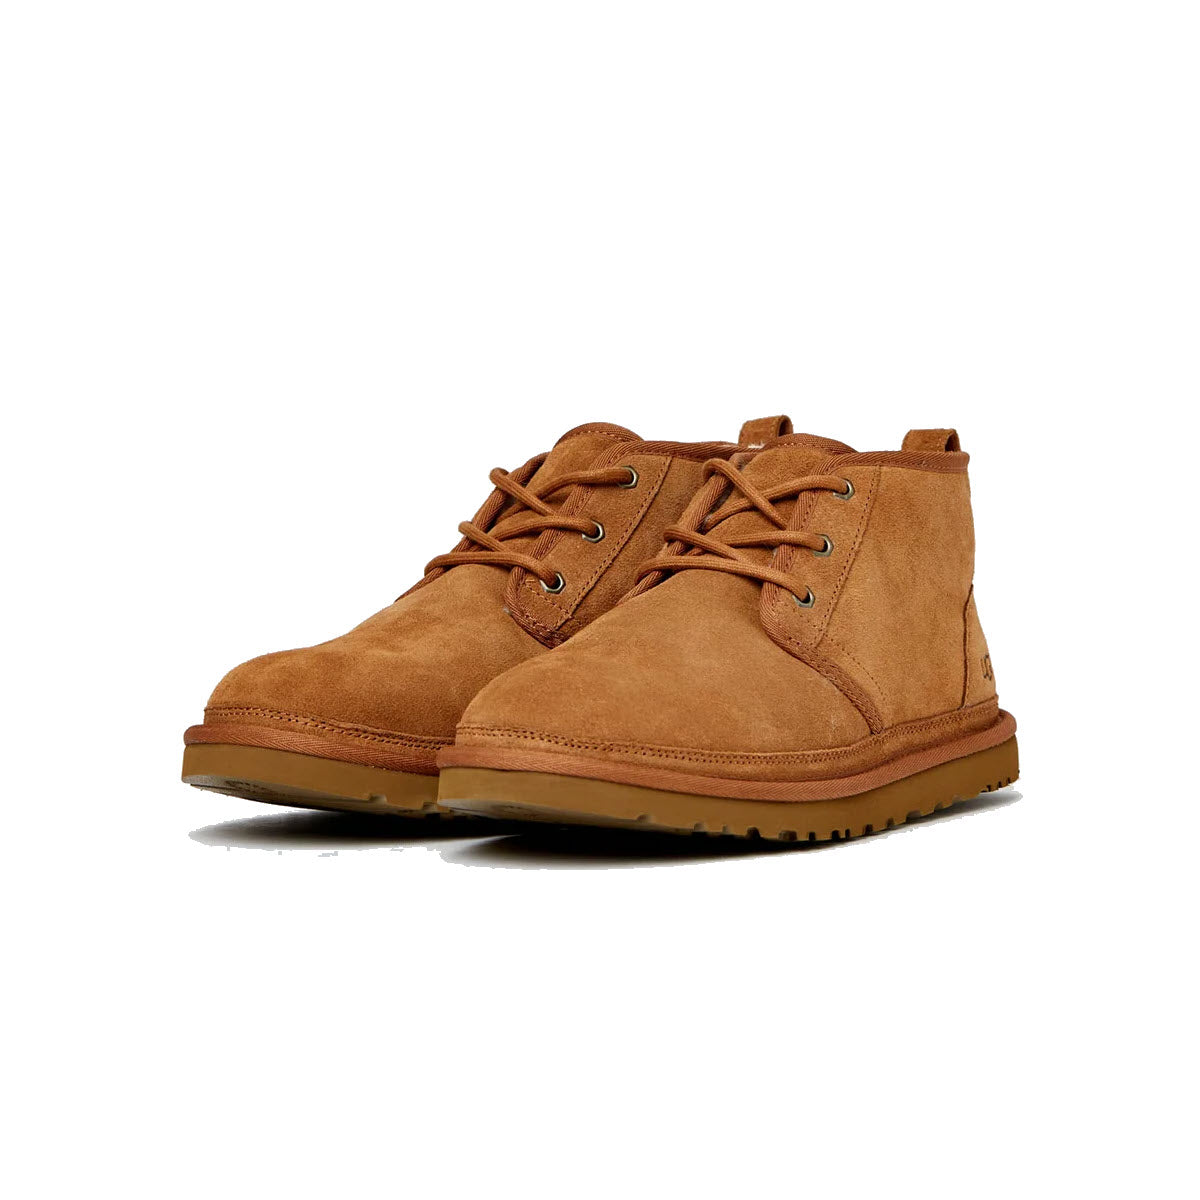 A pair of light brown suede Ugg Neumel lace insulated boots in chestnut, displayed against a white background.